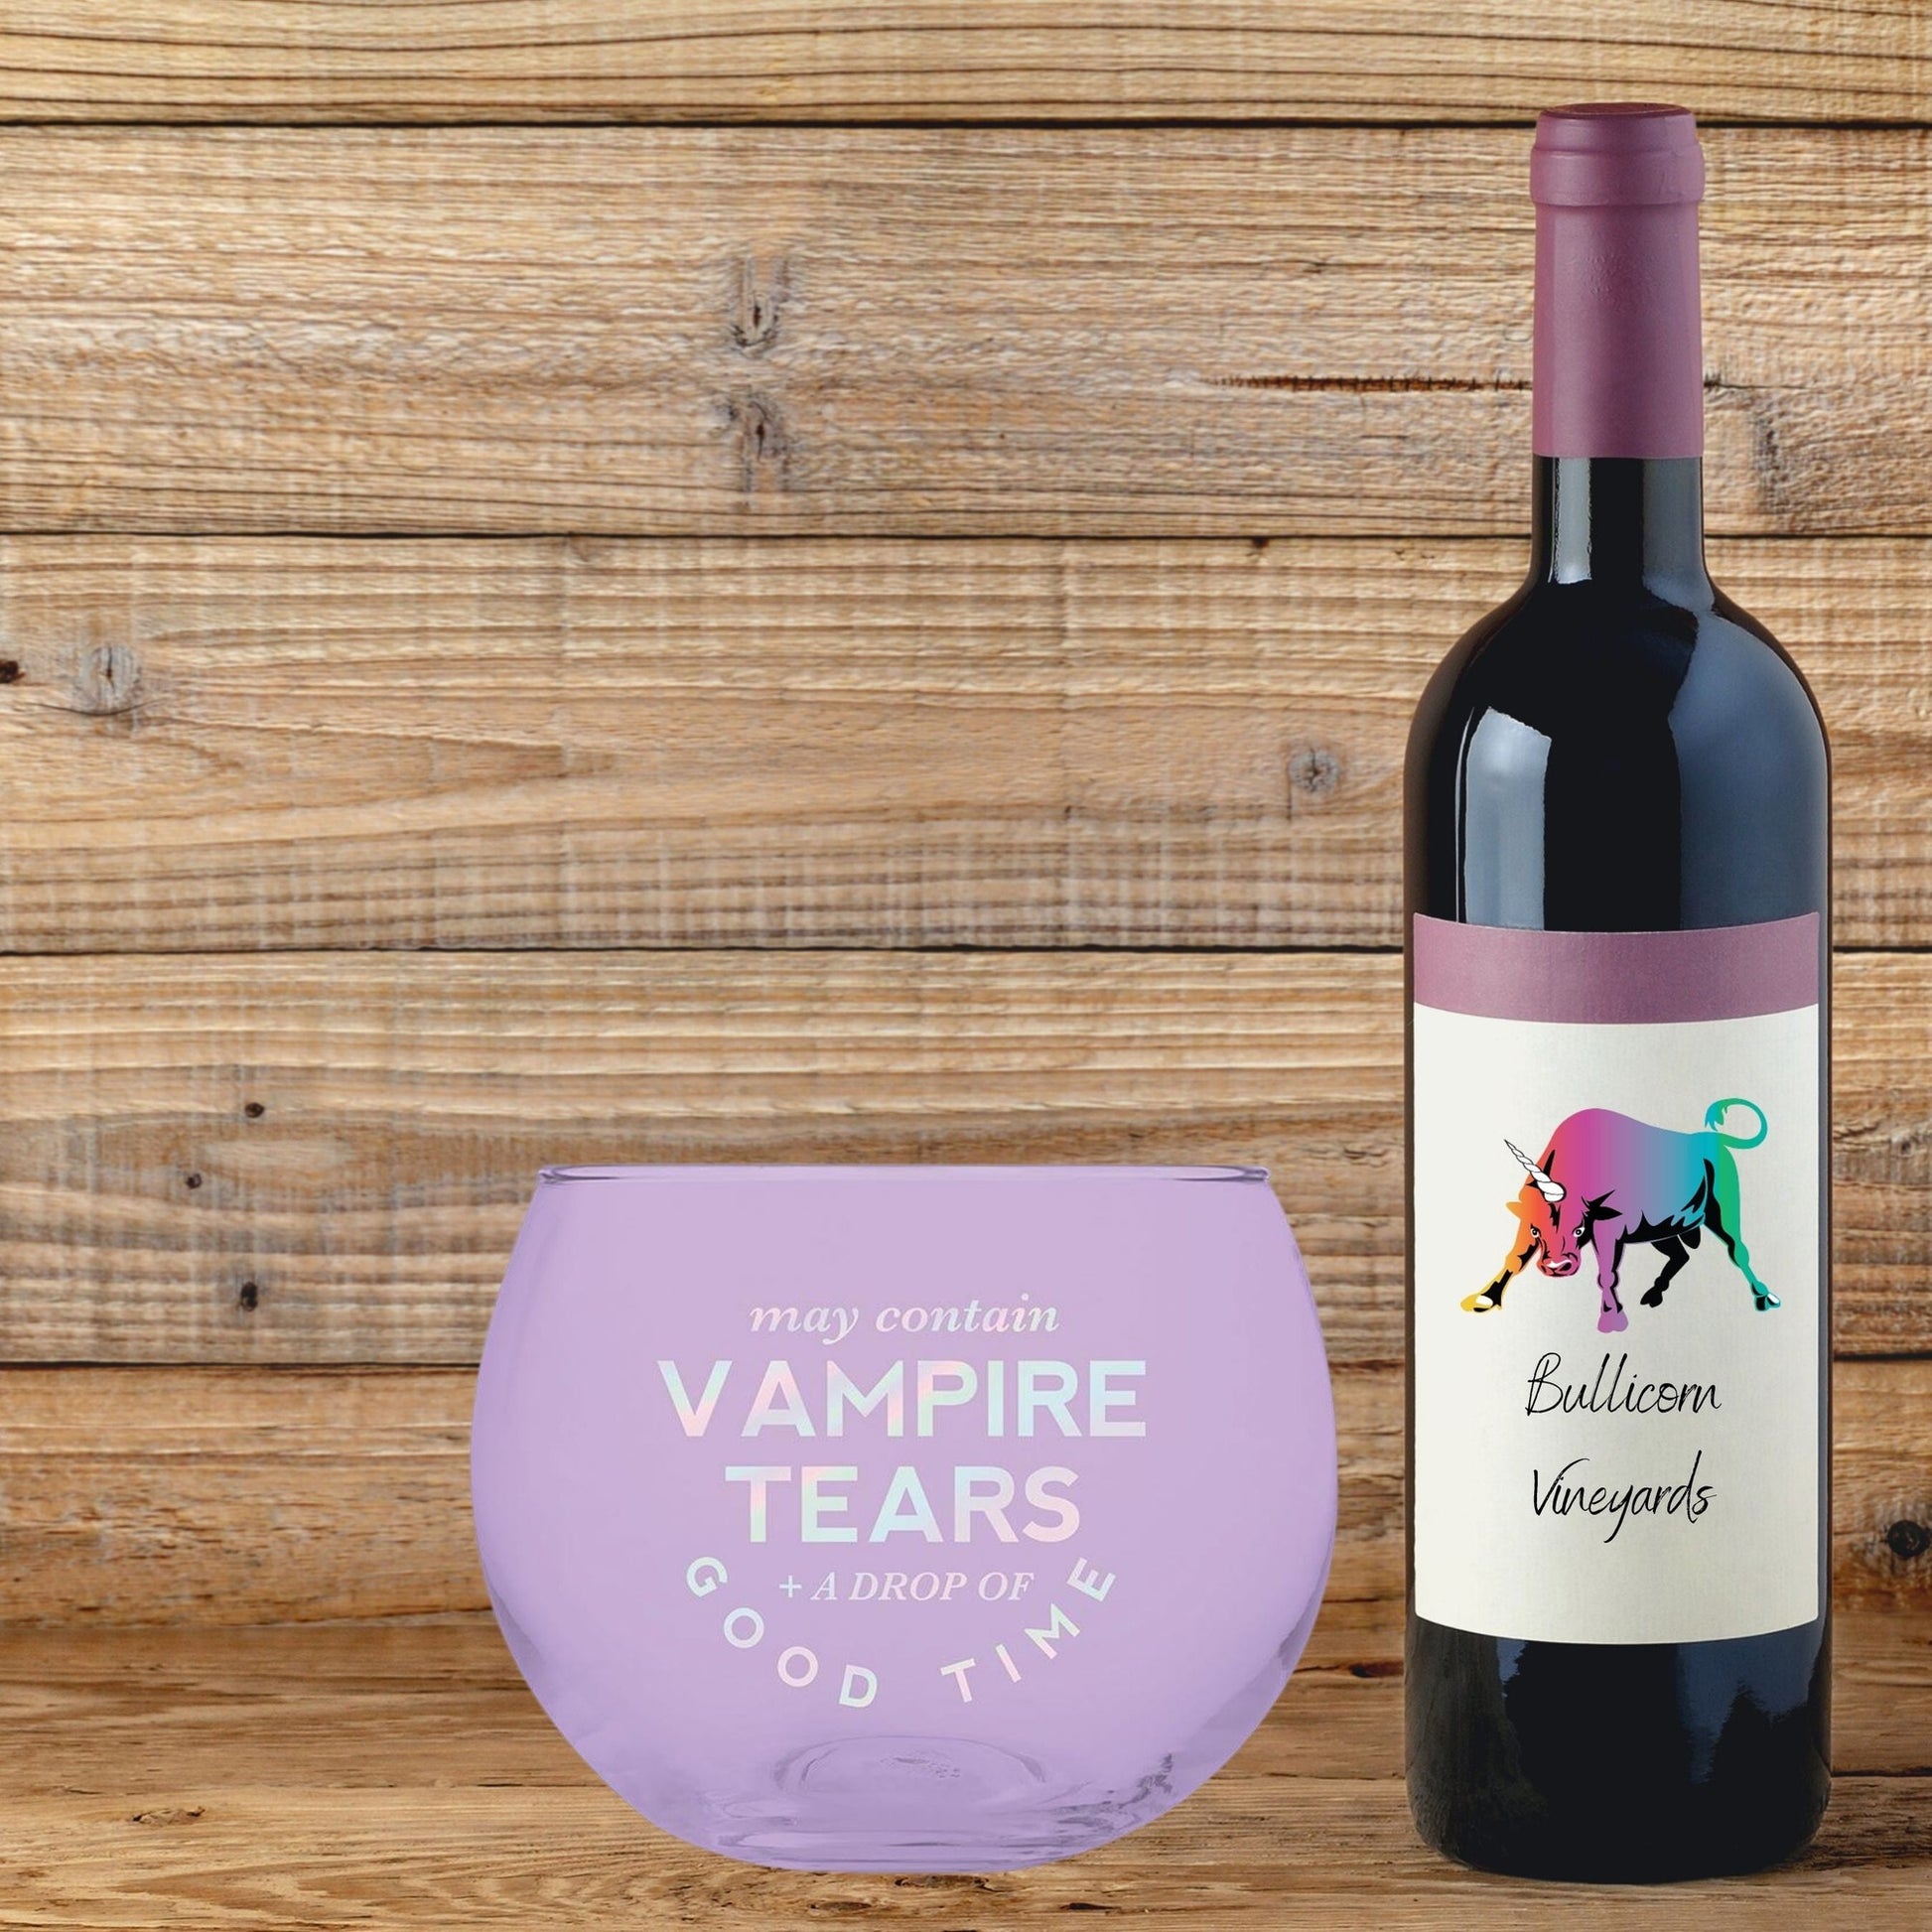 May Contain Vampire Tears Roly Poly Tinted Glass in Lilac | 13 oz.